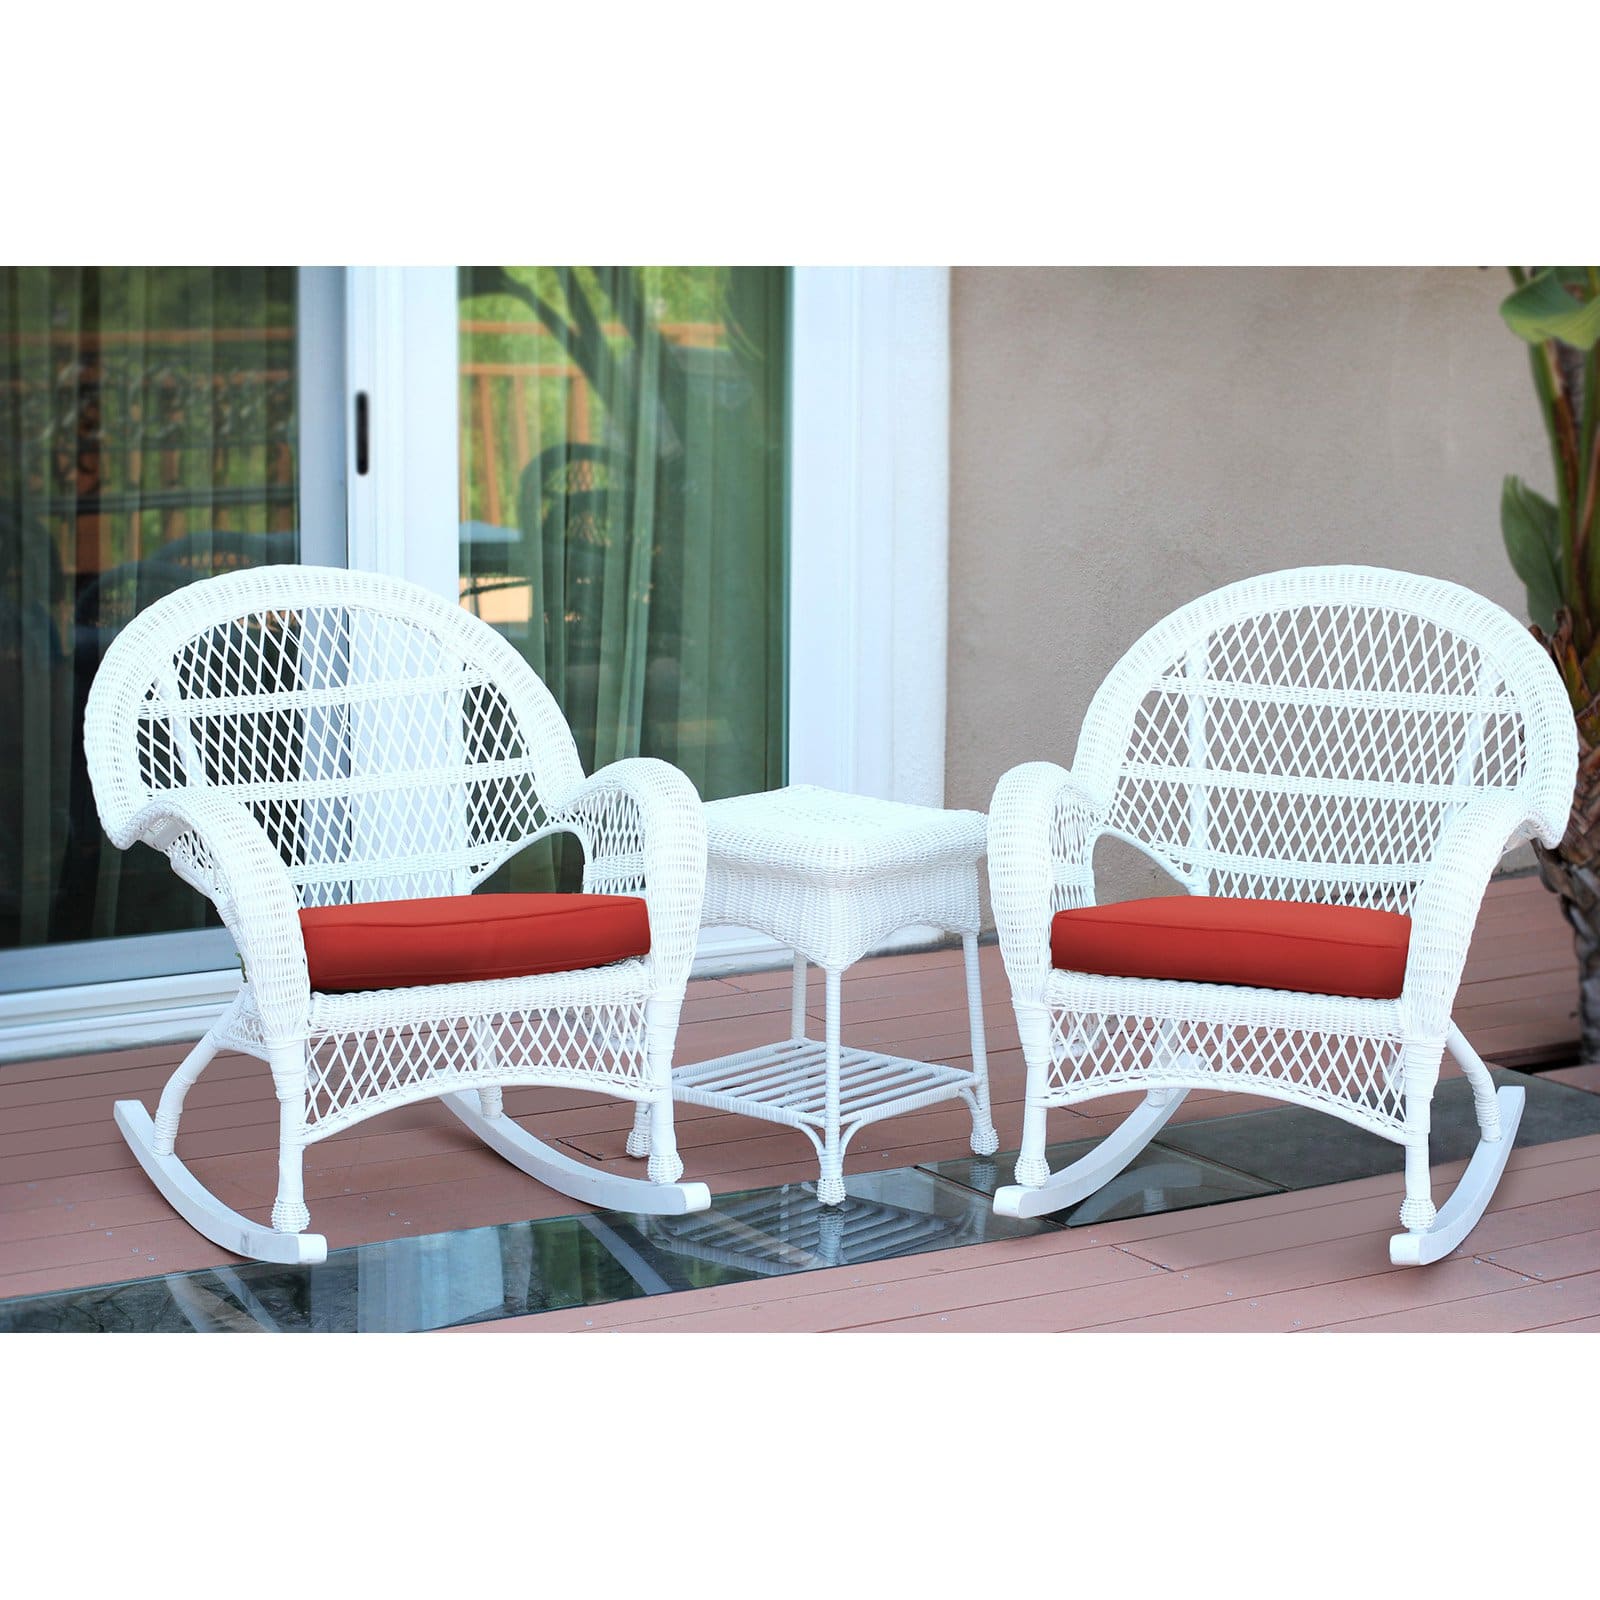 Jeco 3 Piece Wicker Conversation Set in White with Tan Cushions - image 2 of 11